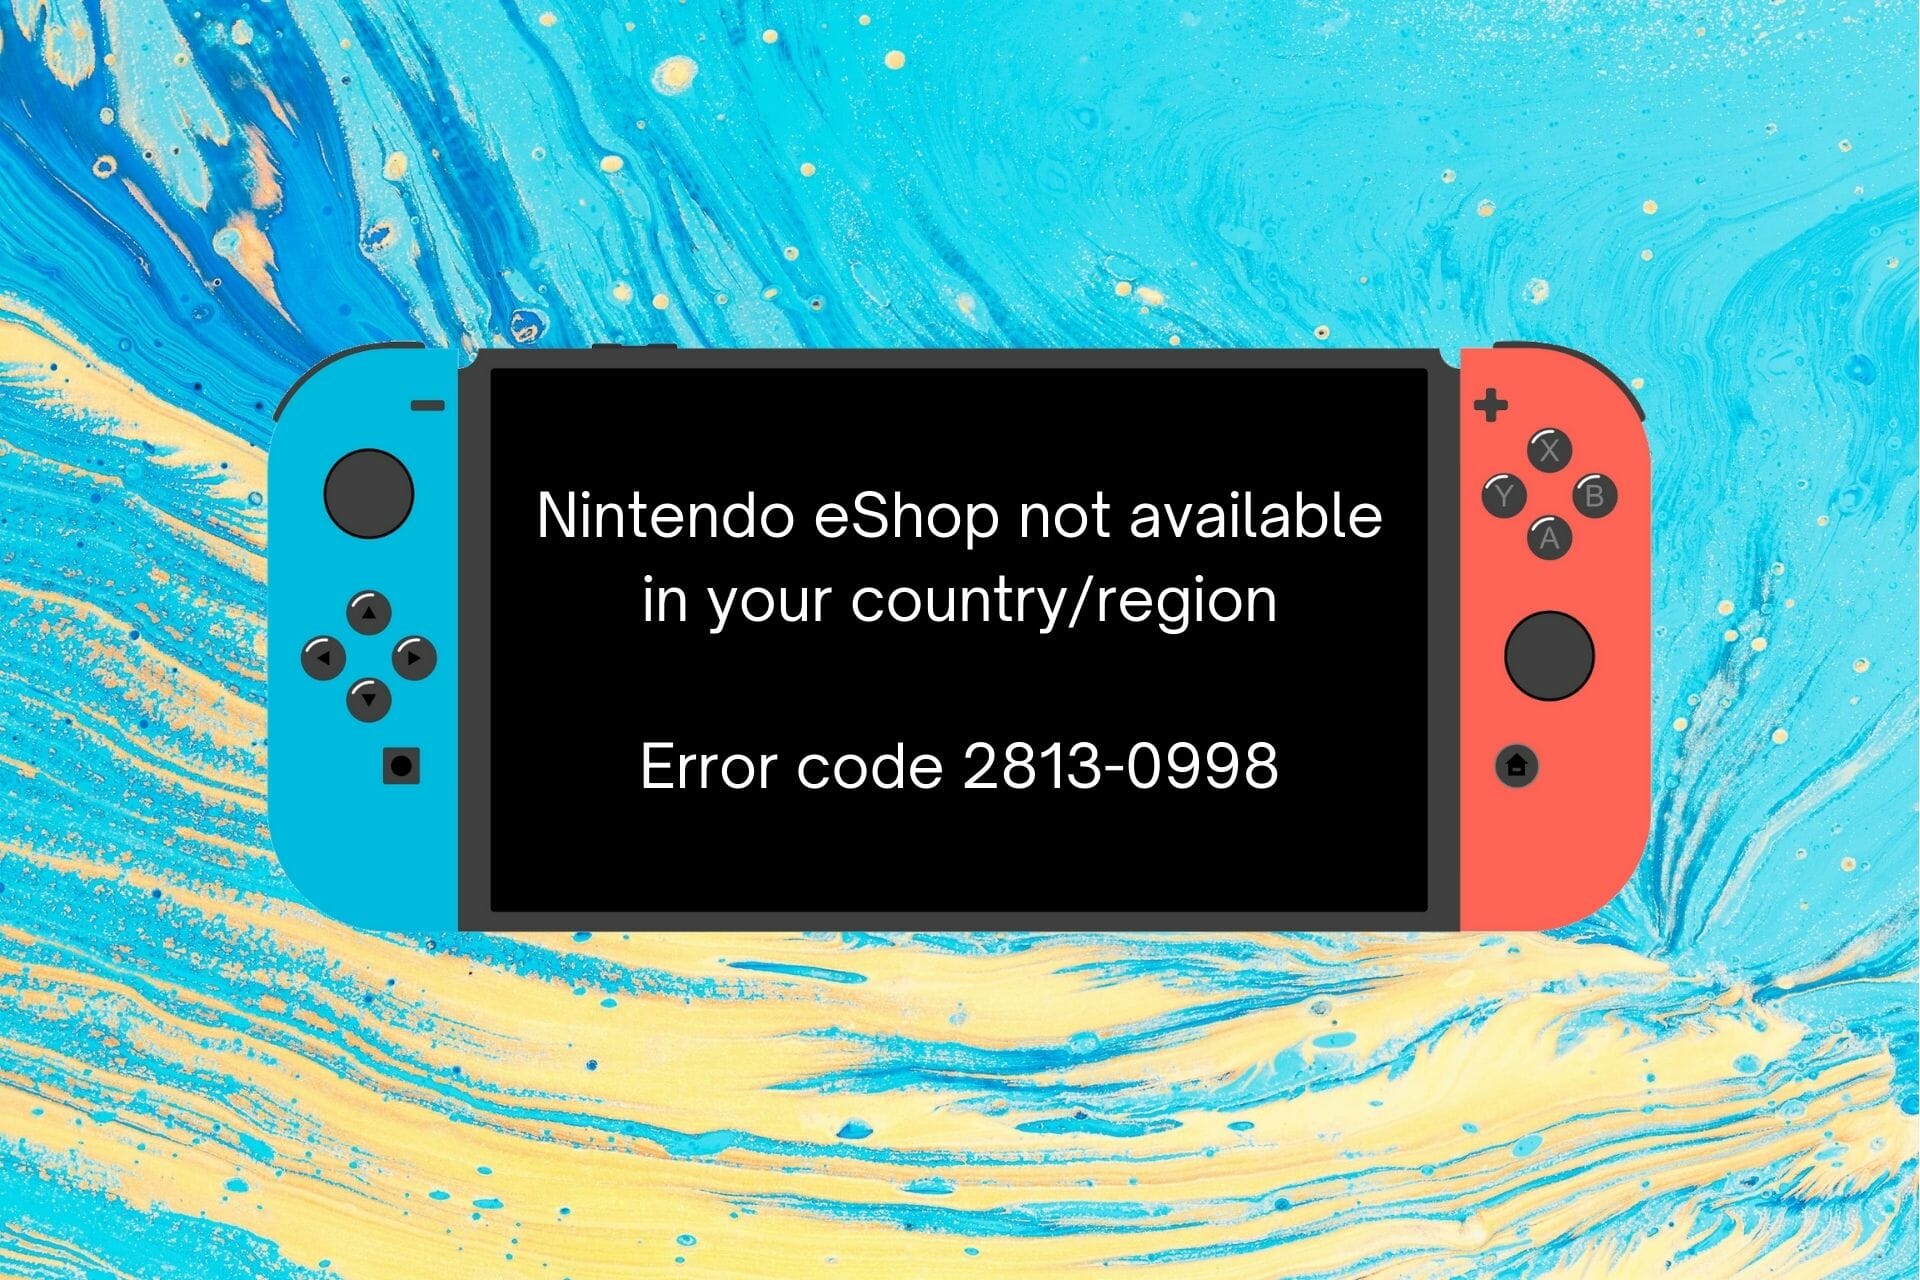 fix Nintendo eShop not available in your country